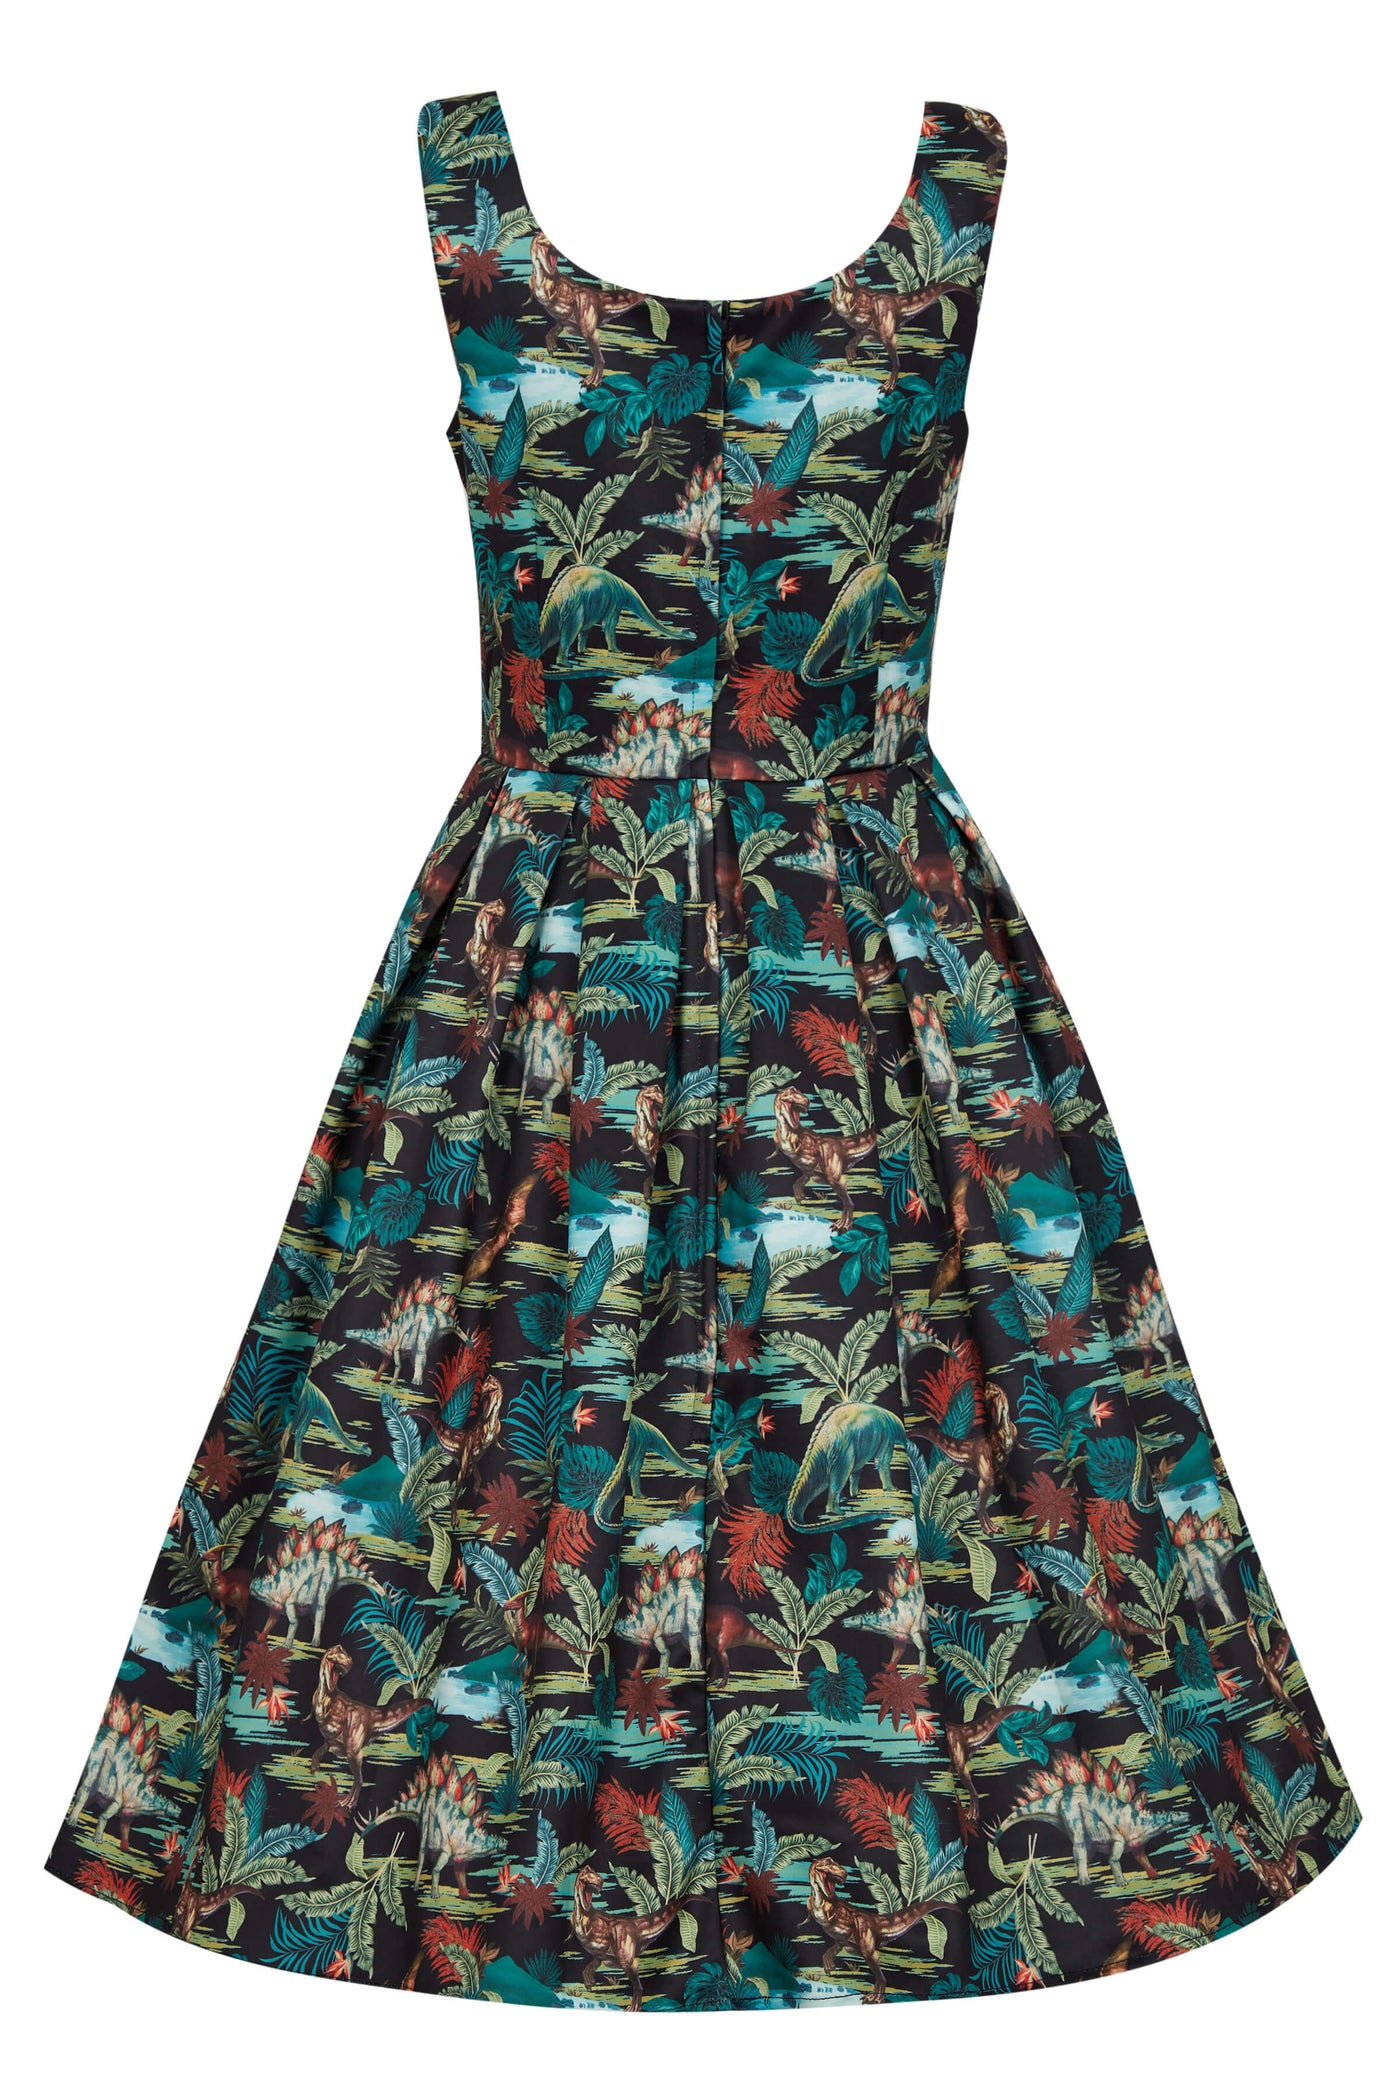 Plus Size Dinosaur Swing Dress With Pockets back view